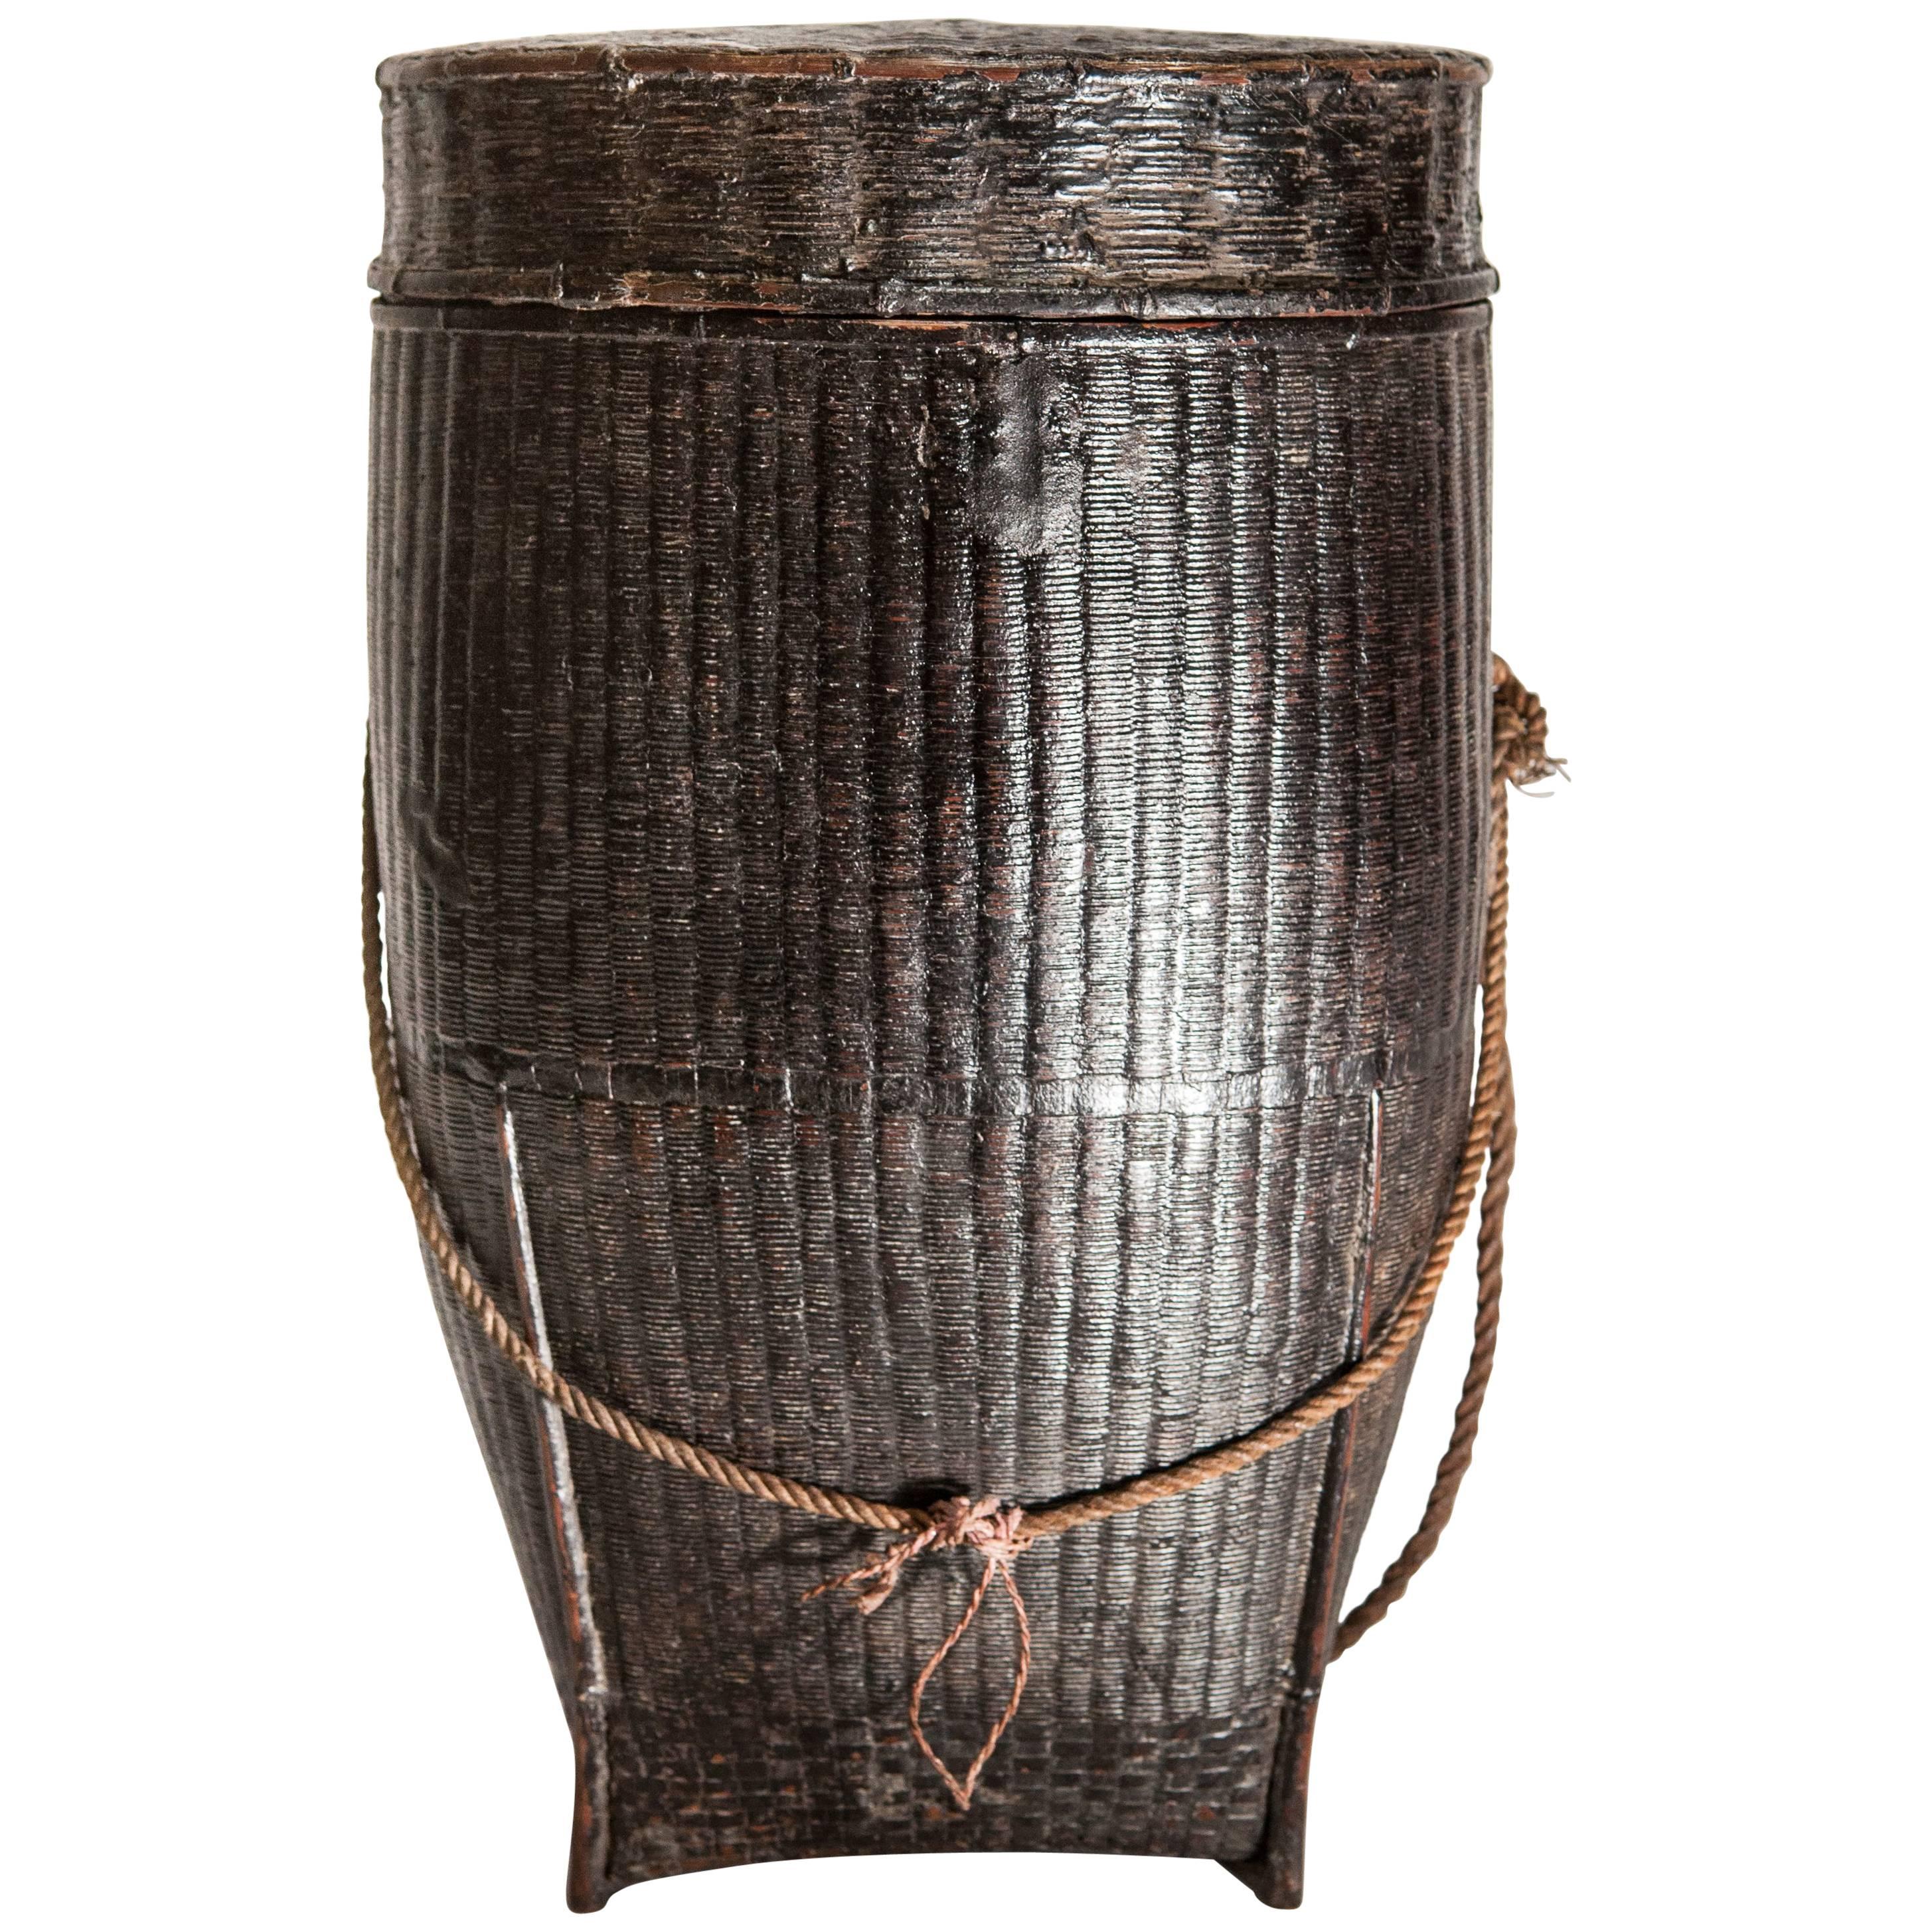 Tribal Storage Basket with Lid and Lacquer, Karen of Burma, Mid-20th Century